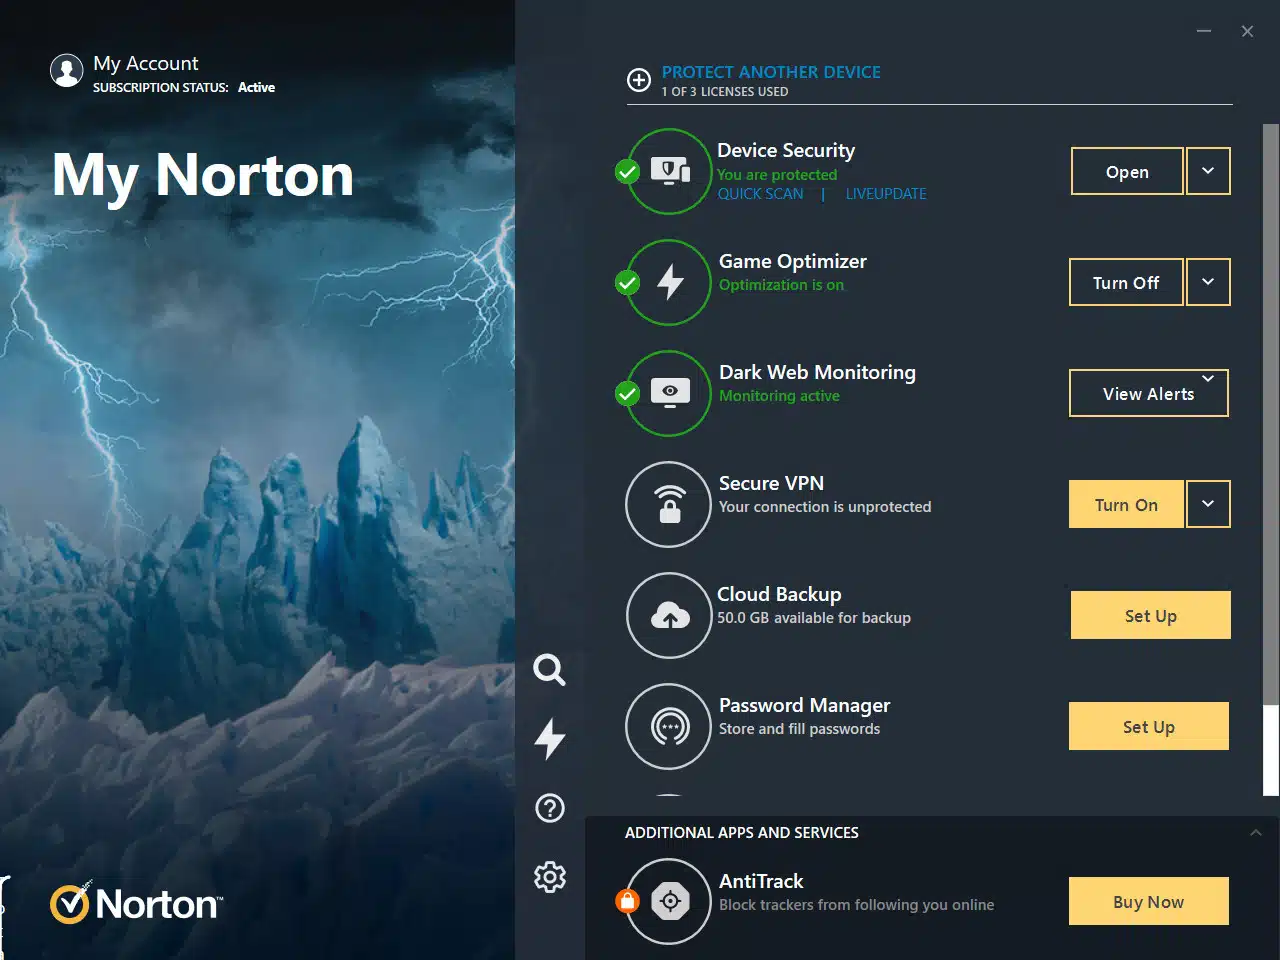 Norton 360 for Gamers dashboard